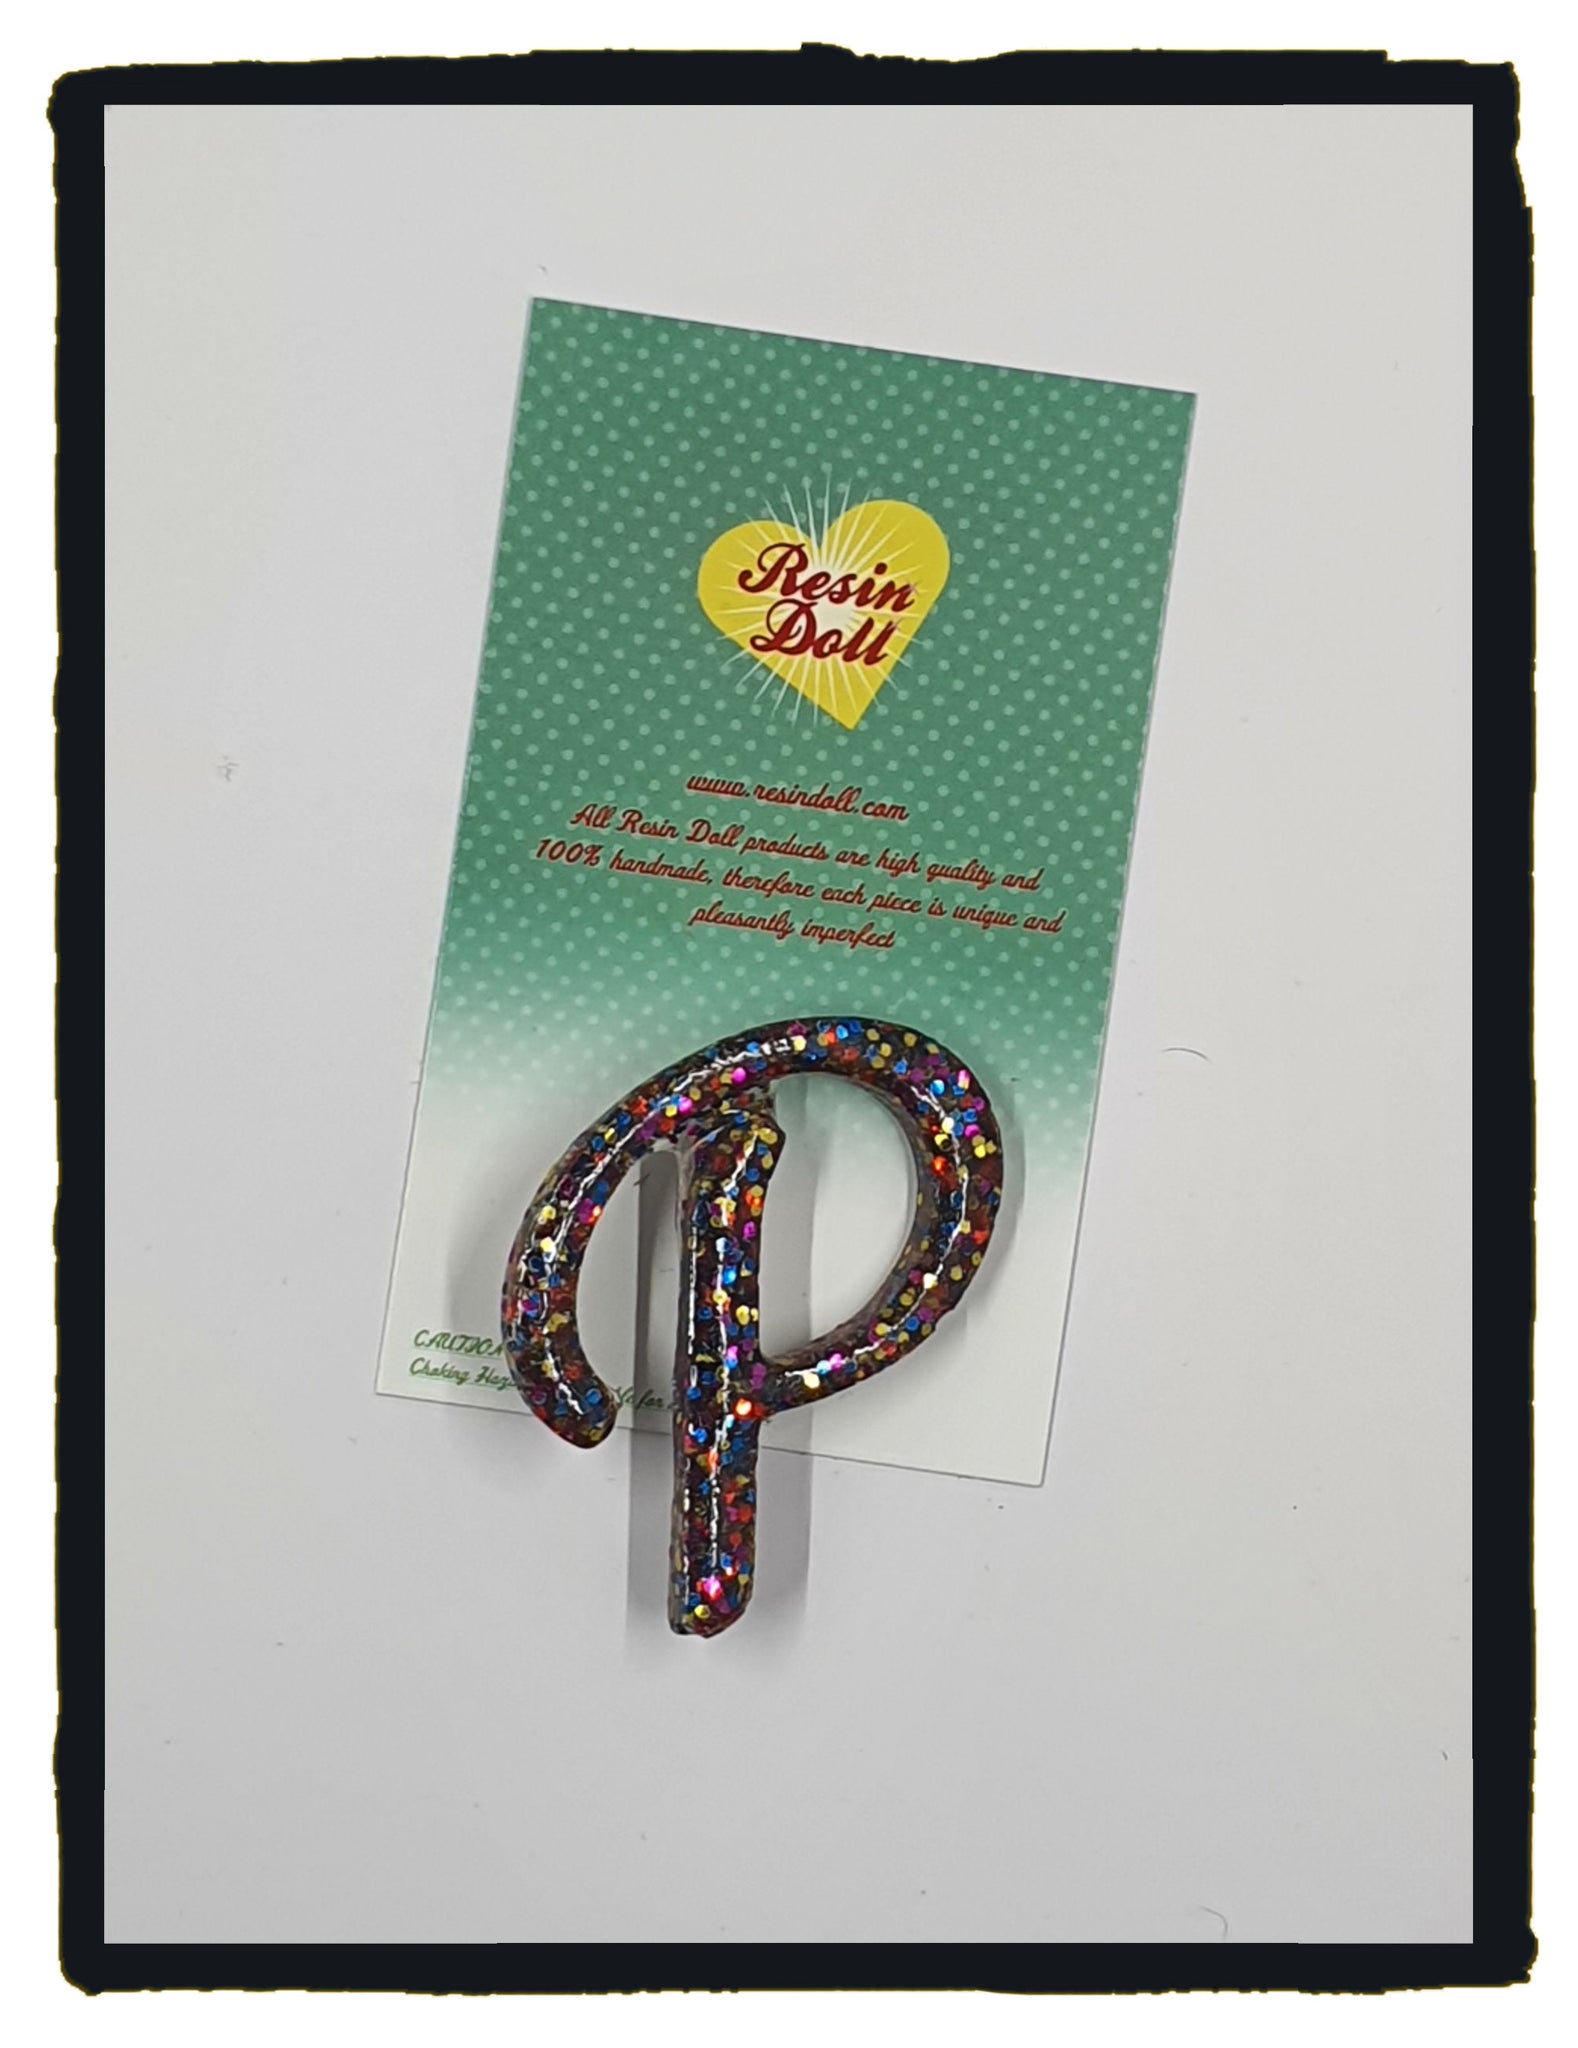 "P" Brooch (various colours available)